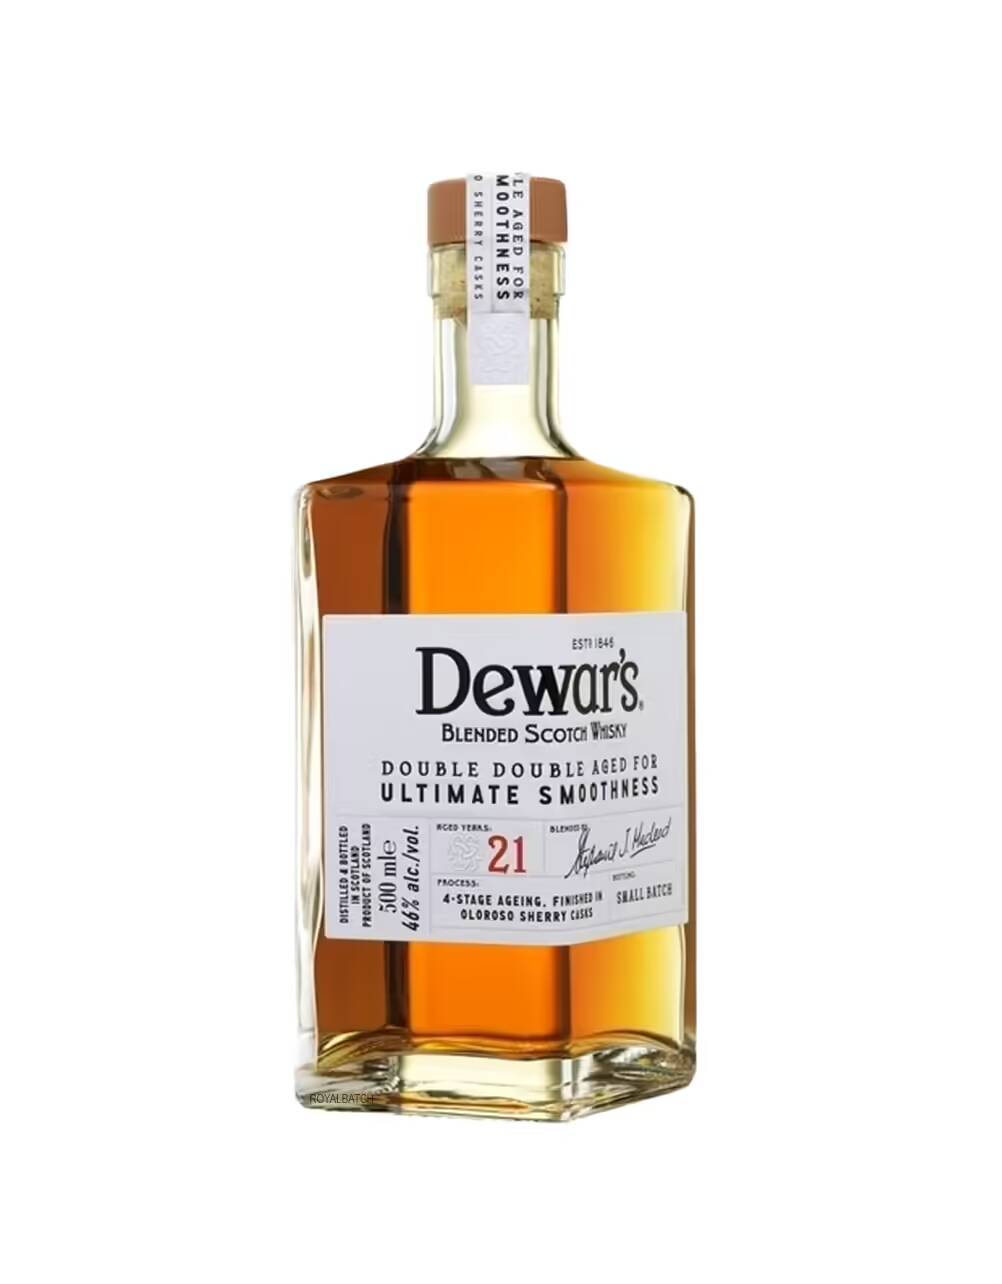 Dewars Double Double 21 years Scotch Whisky